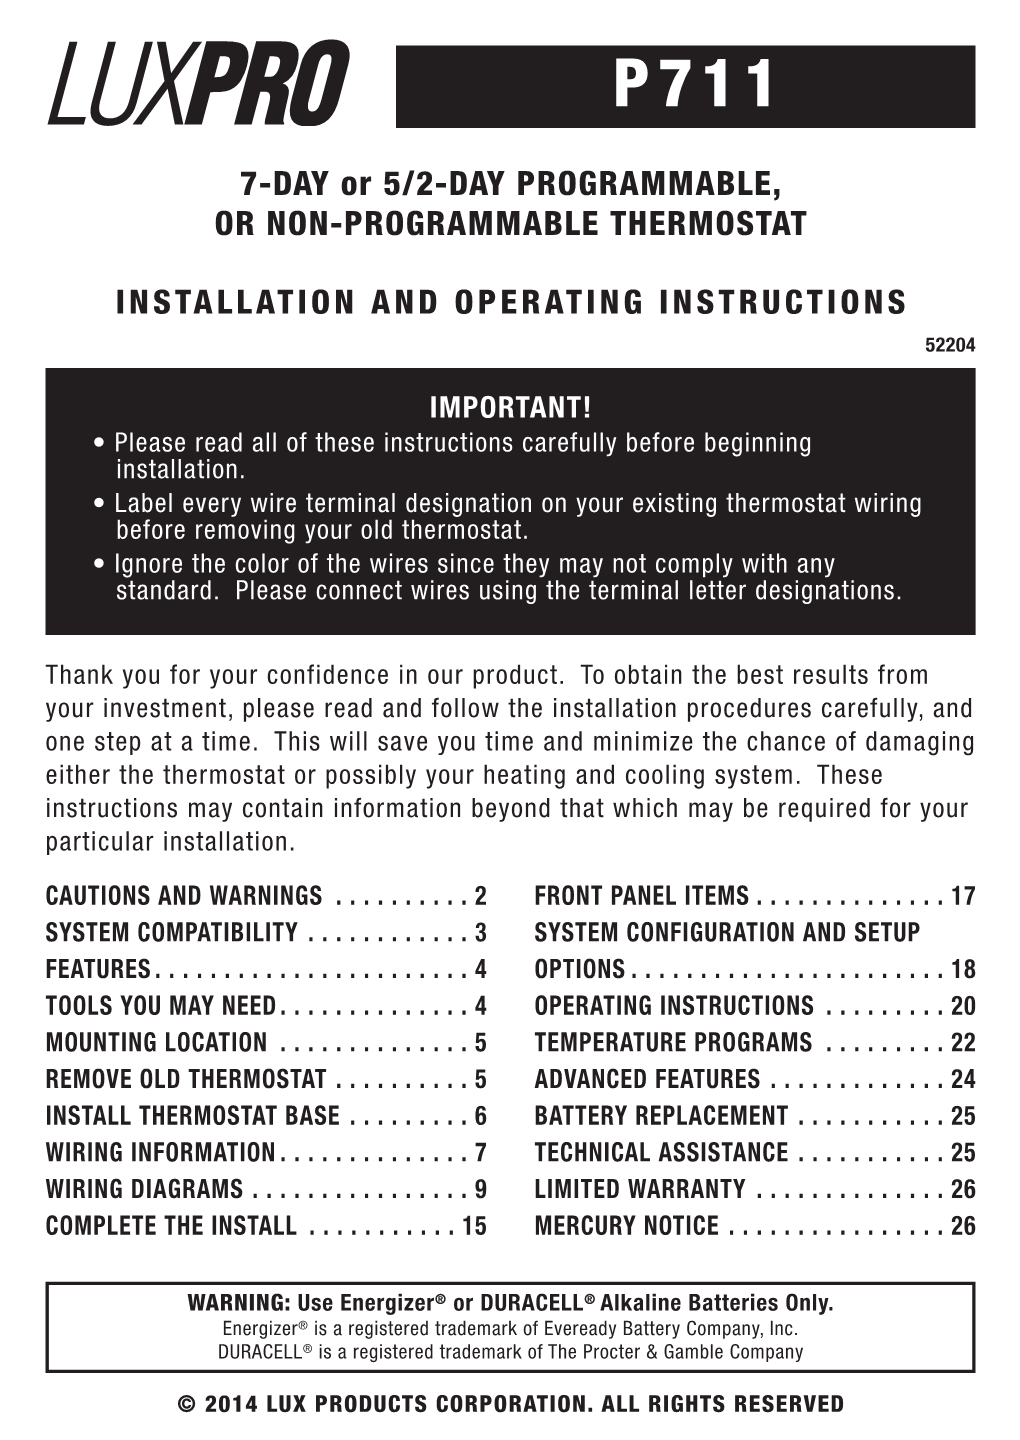 7-DAY Or 5/2-DAY PROGRAMMABLE, OR NON-PROGRAMMABLE THERMOSTAT INSTALLATION and OPERATING INSTRUCTIONS